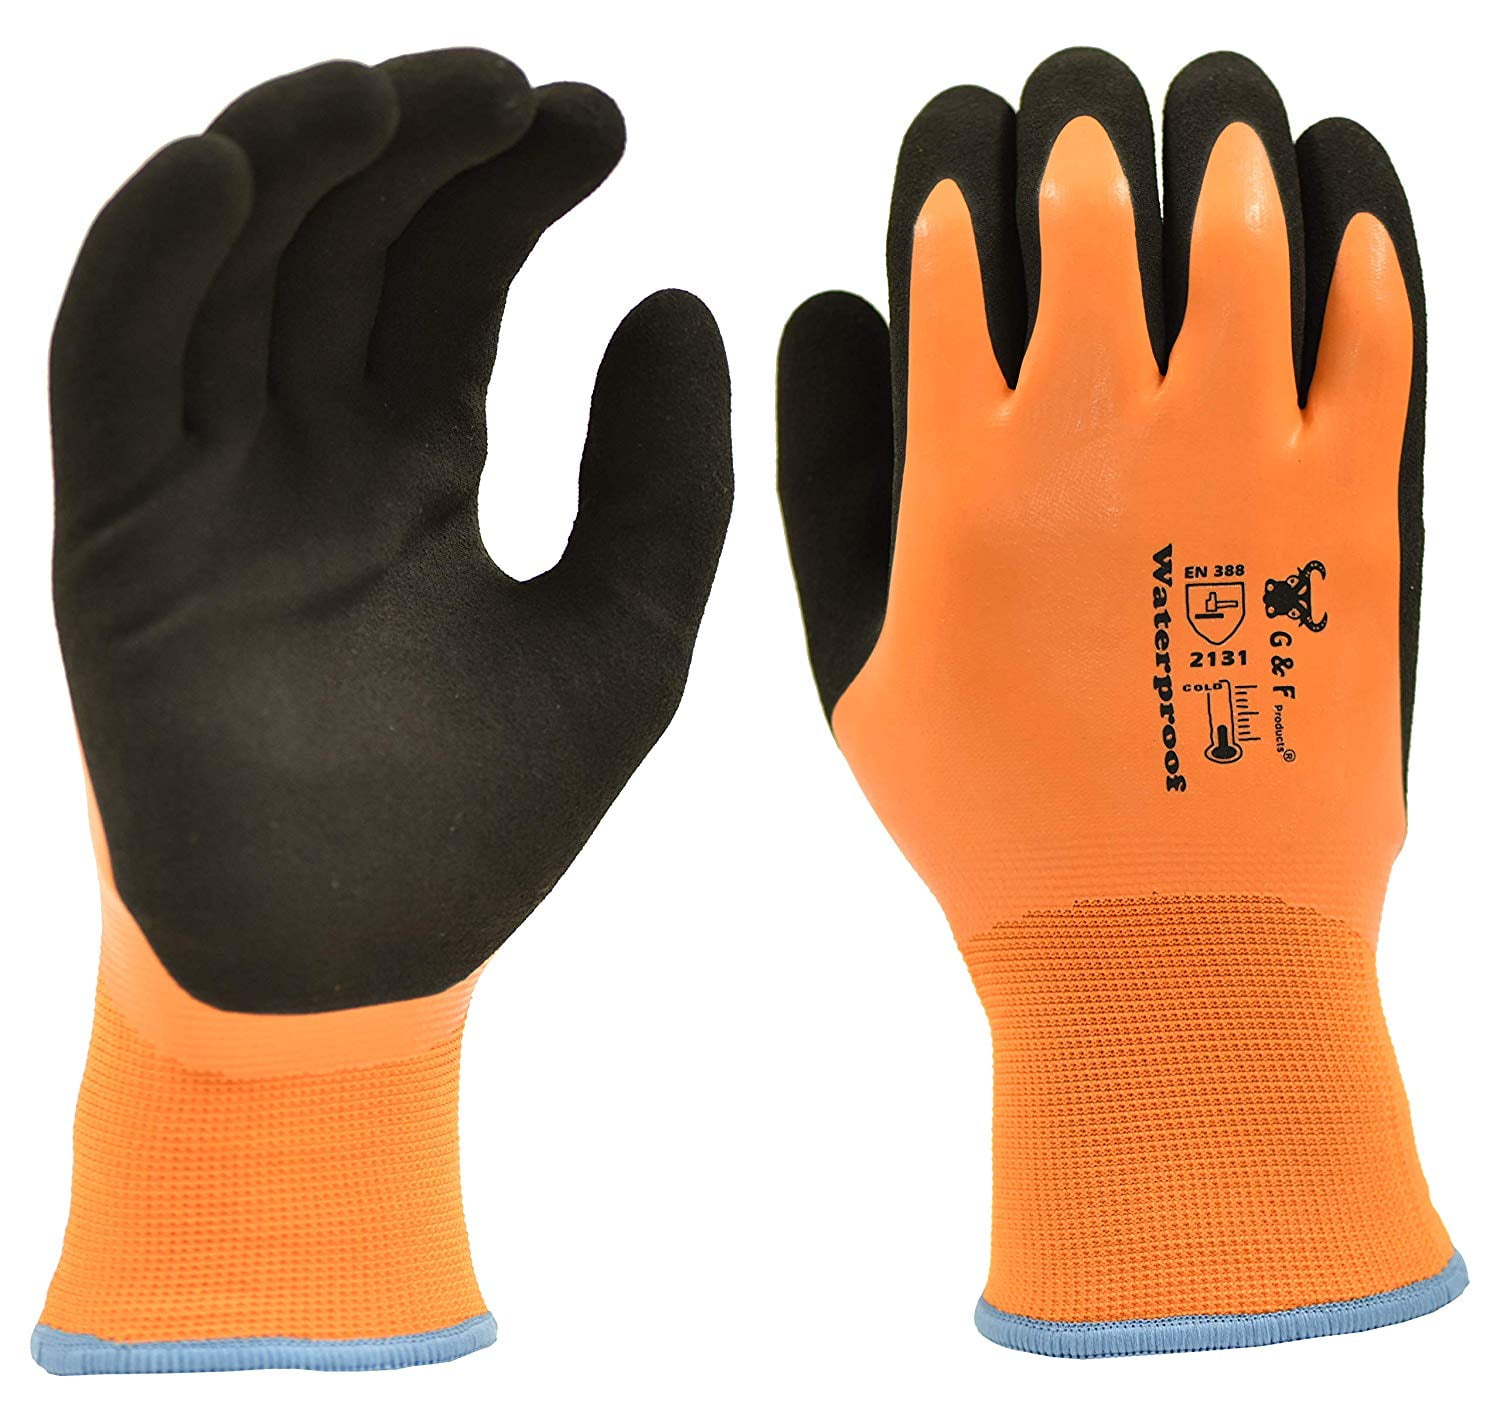 Large Heavy Duty Insulated Latex Winter Work Gloves 